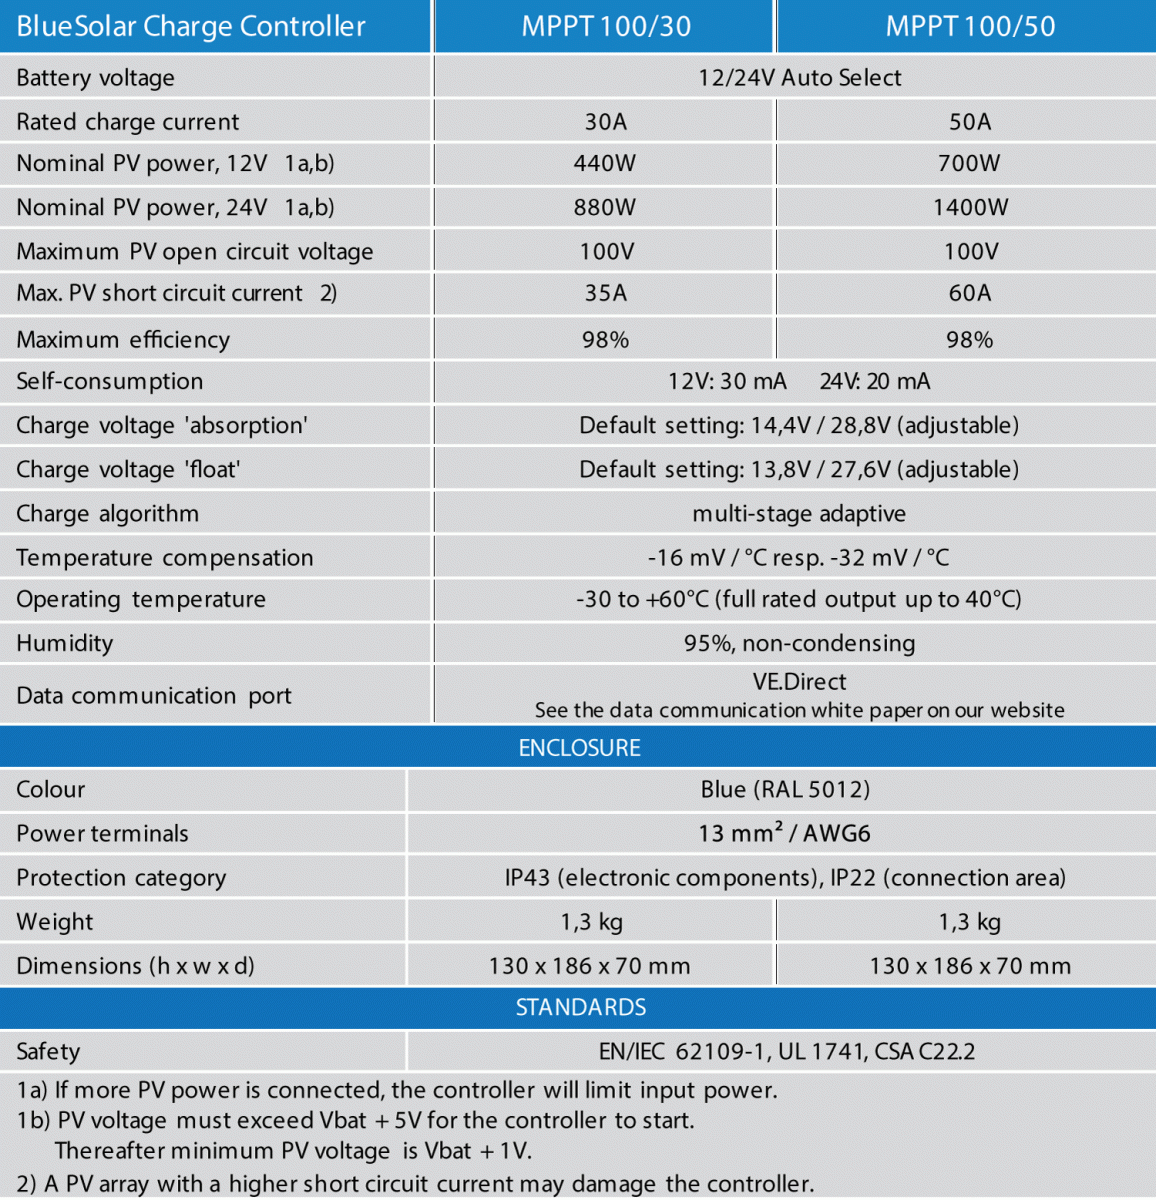 MPPT 100/30 & 100/50 Specifications